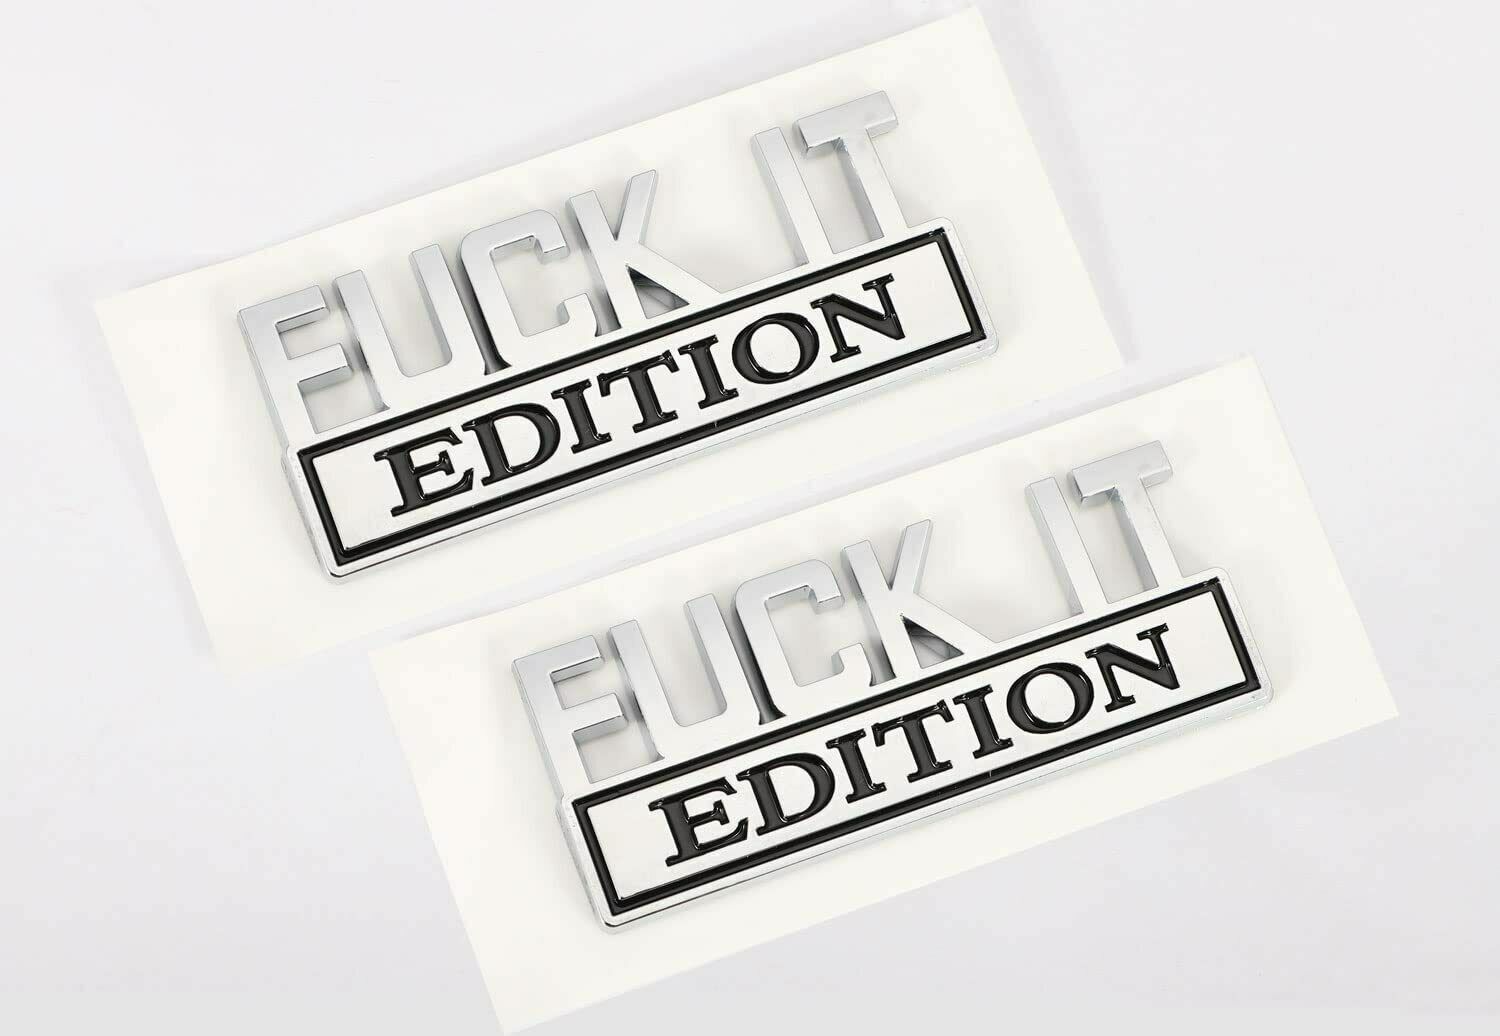 2pc Chrome Black FUCK-IT EDITION Emblem Badge Decal Sticker for Chevy Car Truck